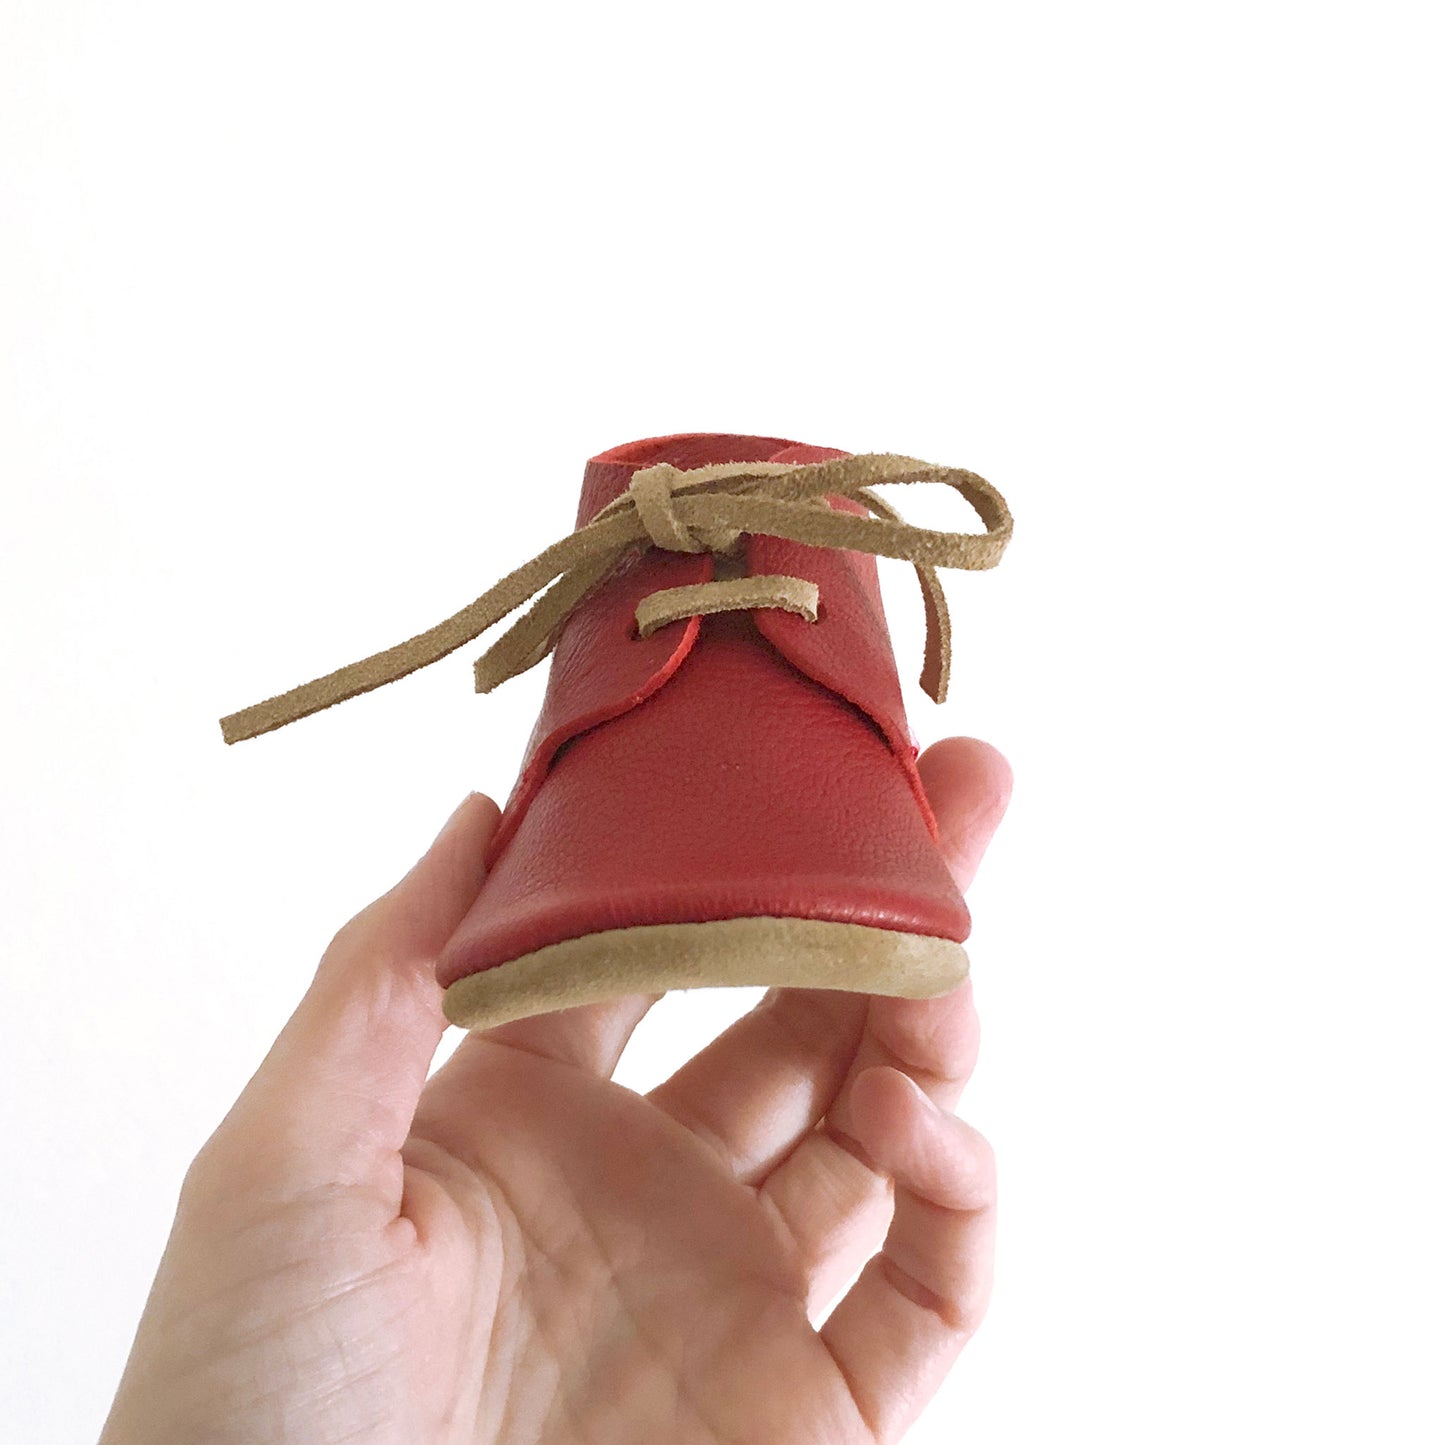 Soft soled leather baby shoes - Red